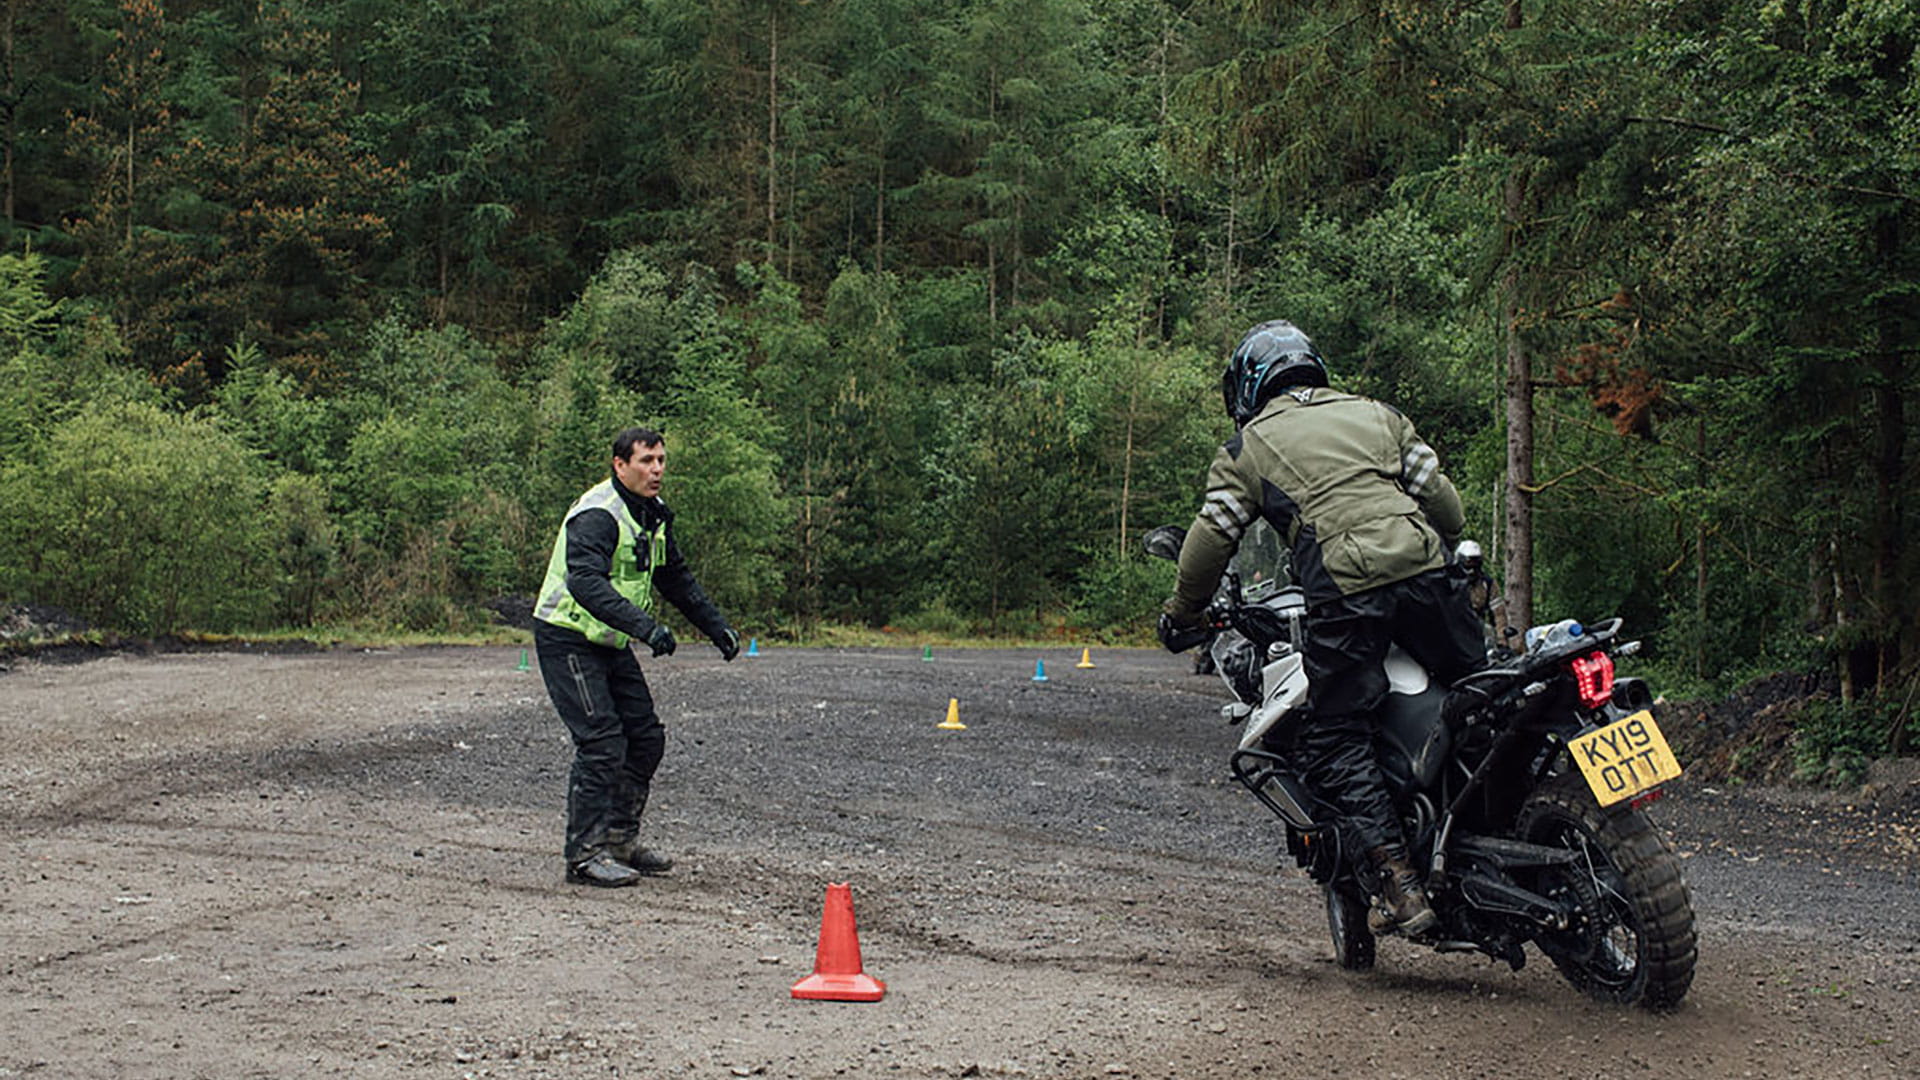 Training course for the Triumph adventure experience day